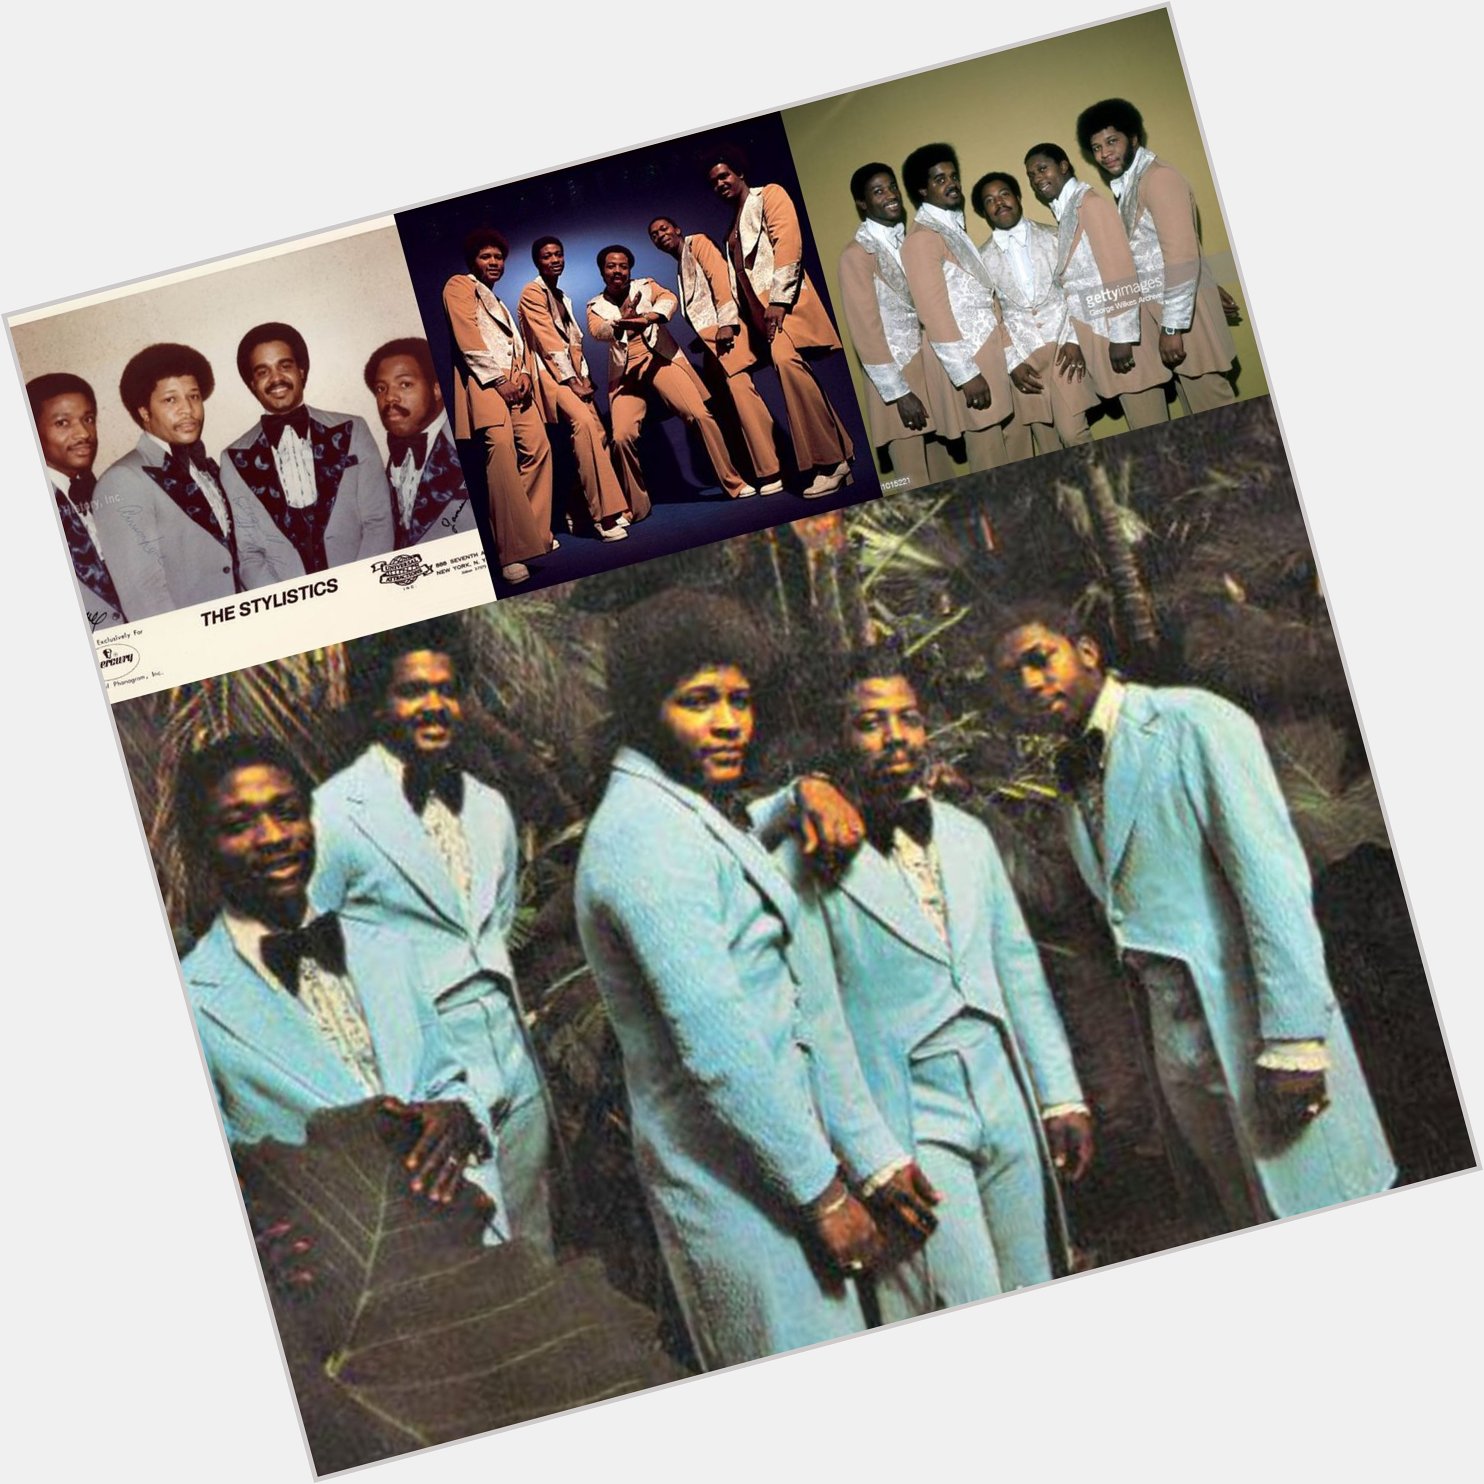 HAPPY 72ND BIRTHDAY RUSSELL THOMPKINS JR. FROM THE STYLISTICS. 